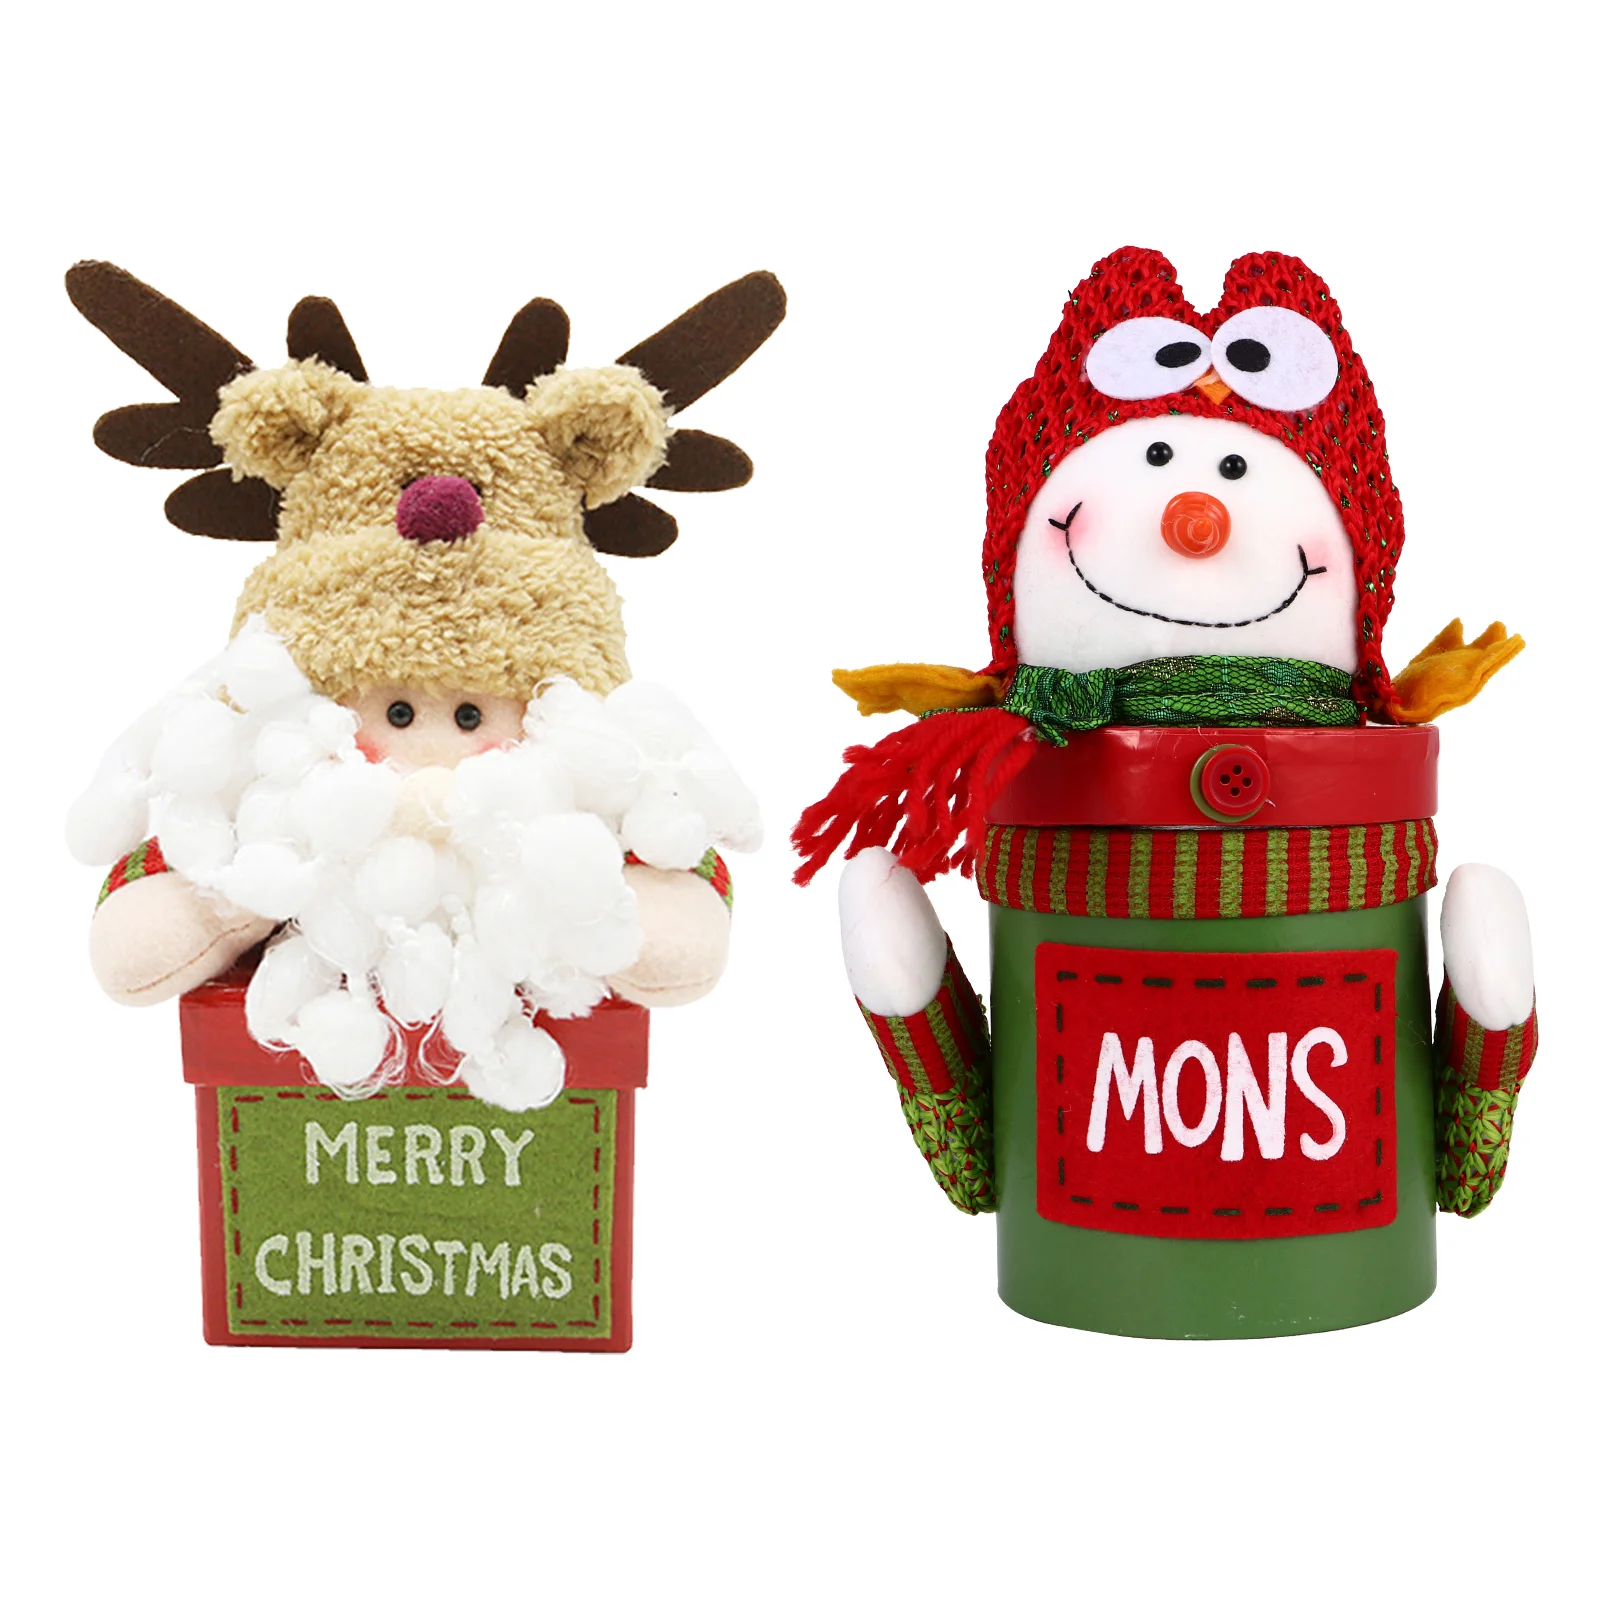 

Christmas Box Candy Boxes Gift Xmas Holiday Snowman Jar Party Treat Santa Cookie Paper Favors Ornaments Reindeer Eve Figures